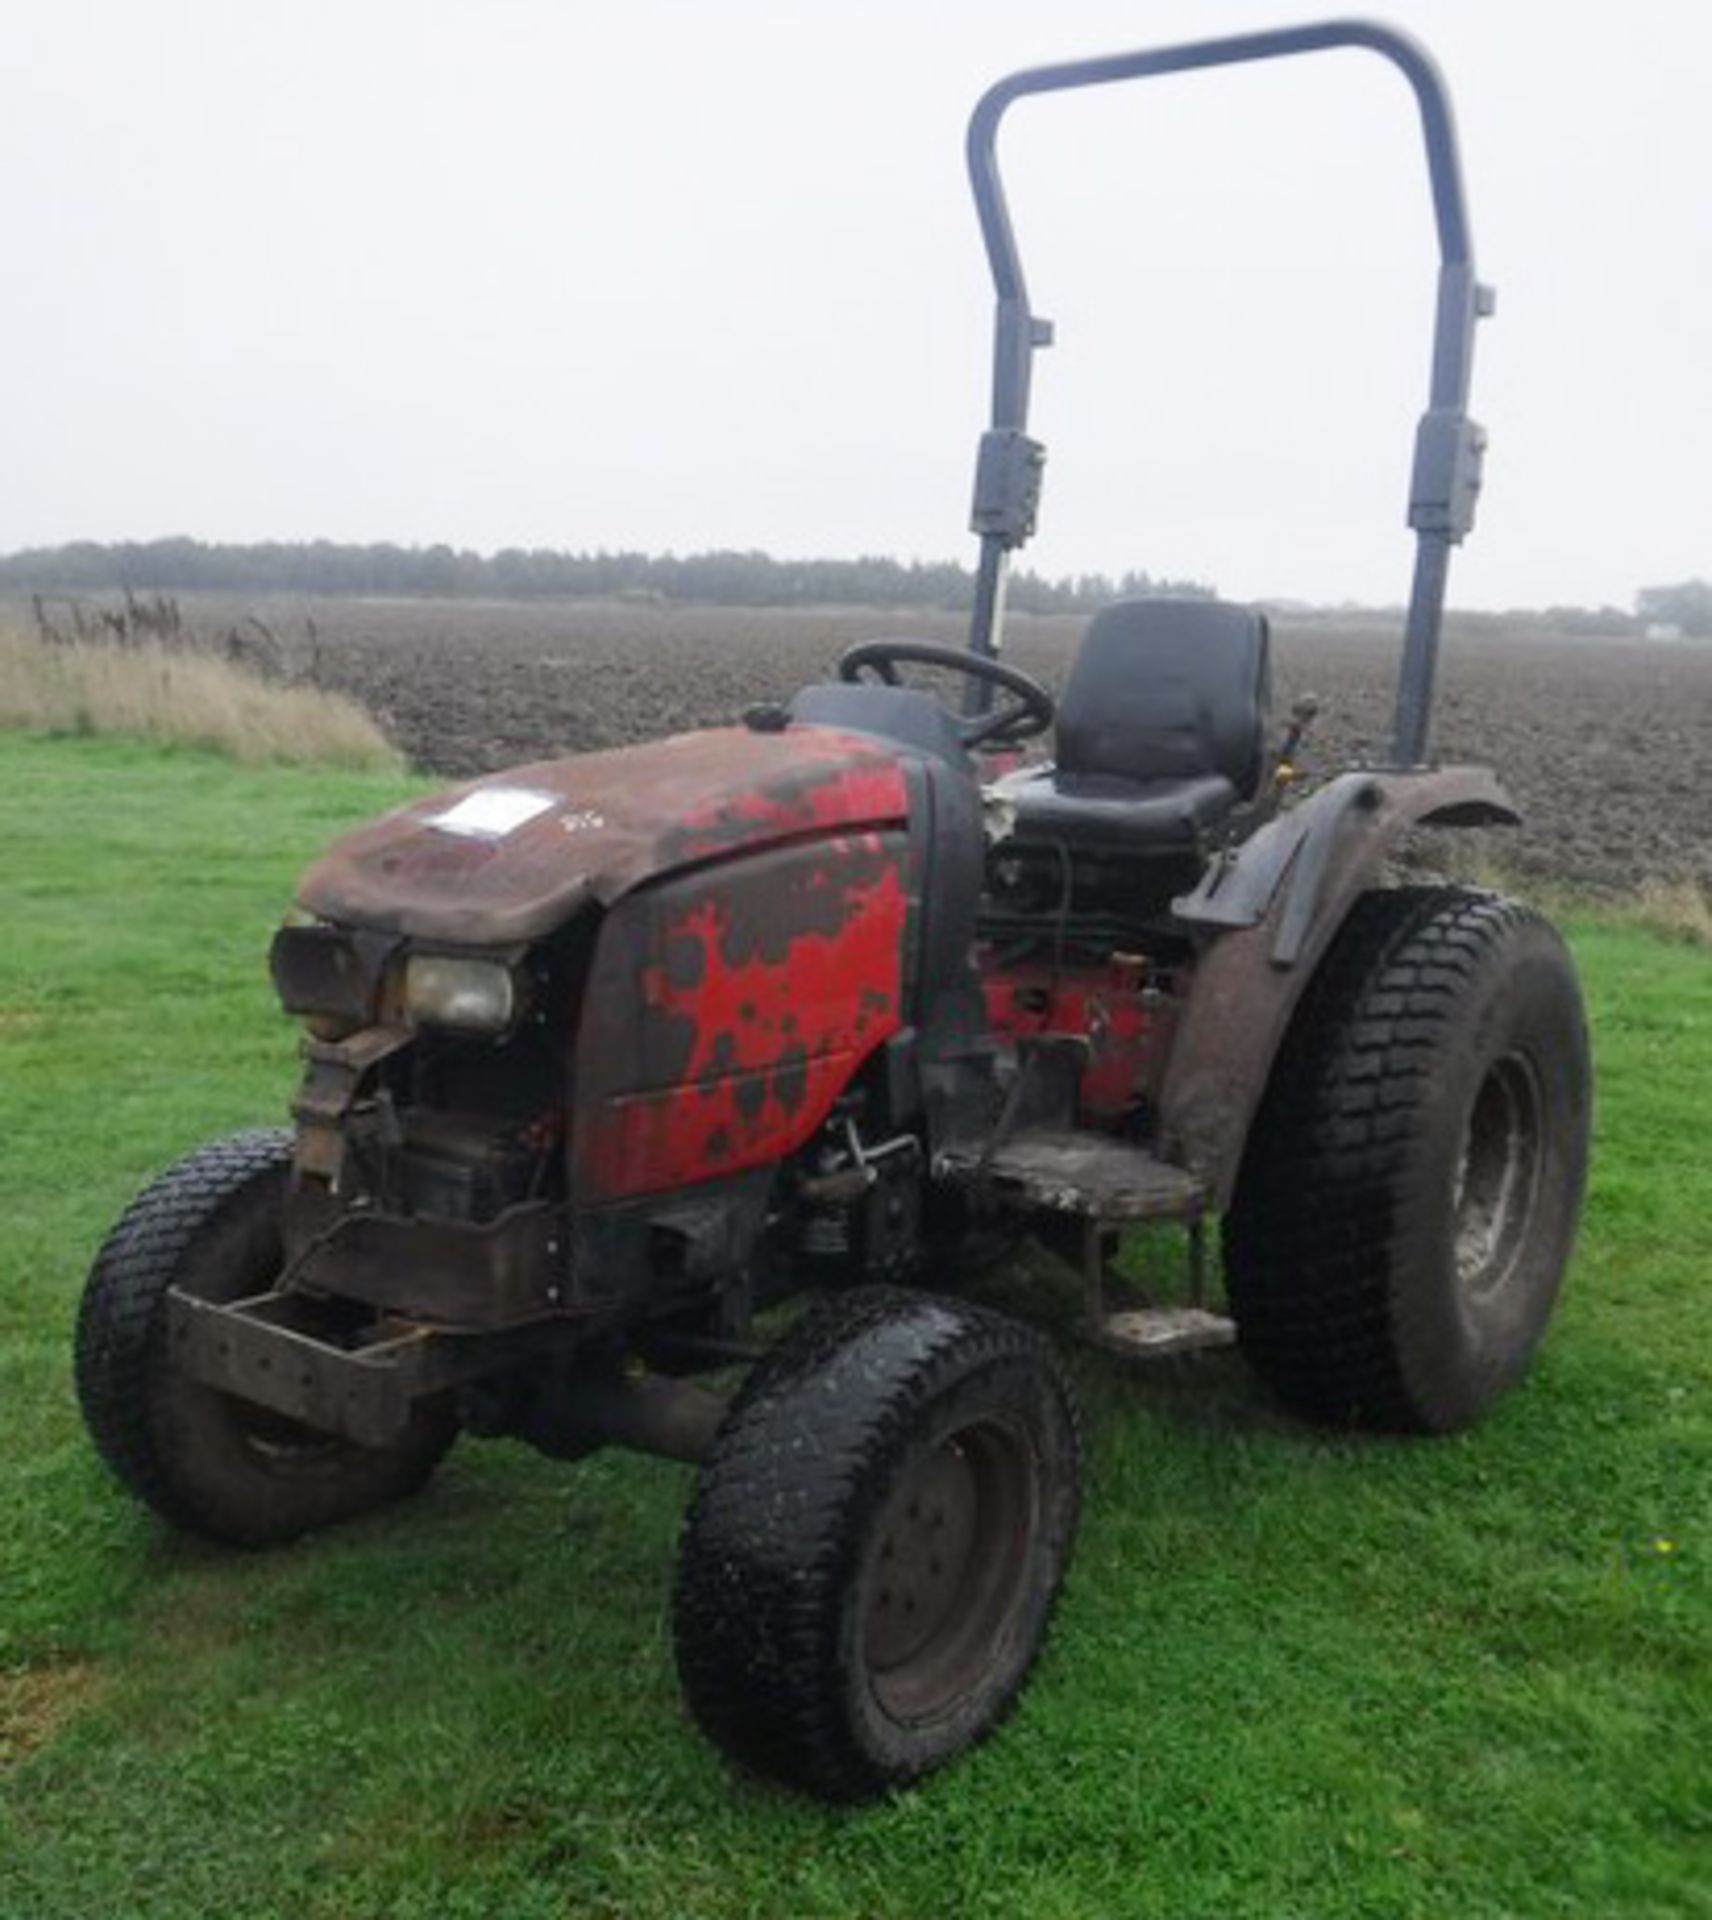 2011 SHIBAURA ST-333 compact tractor. S/N 21108, 2317hrs (not verified)